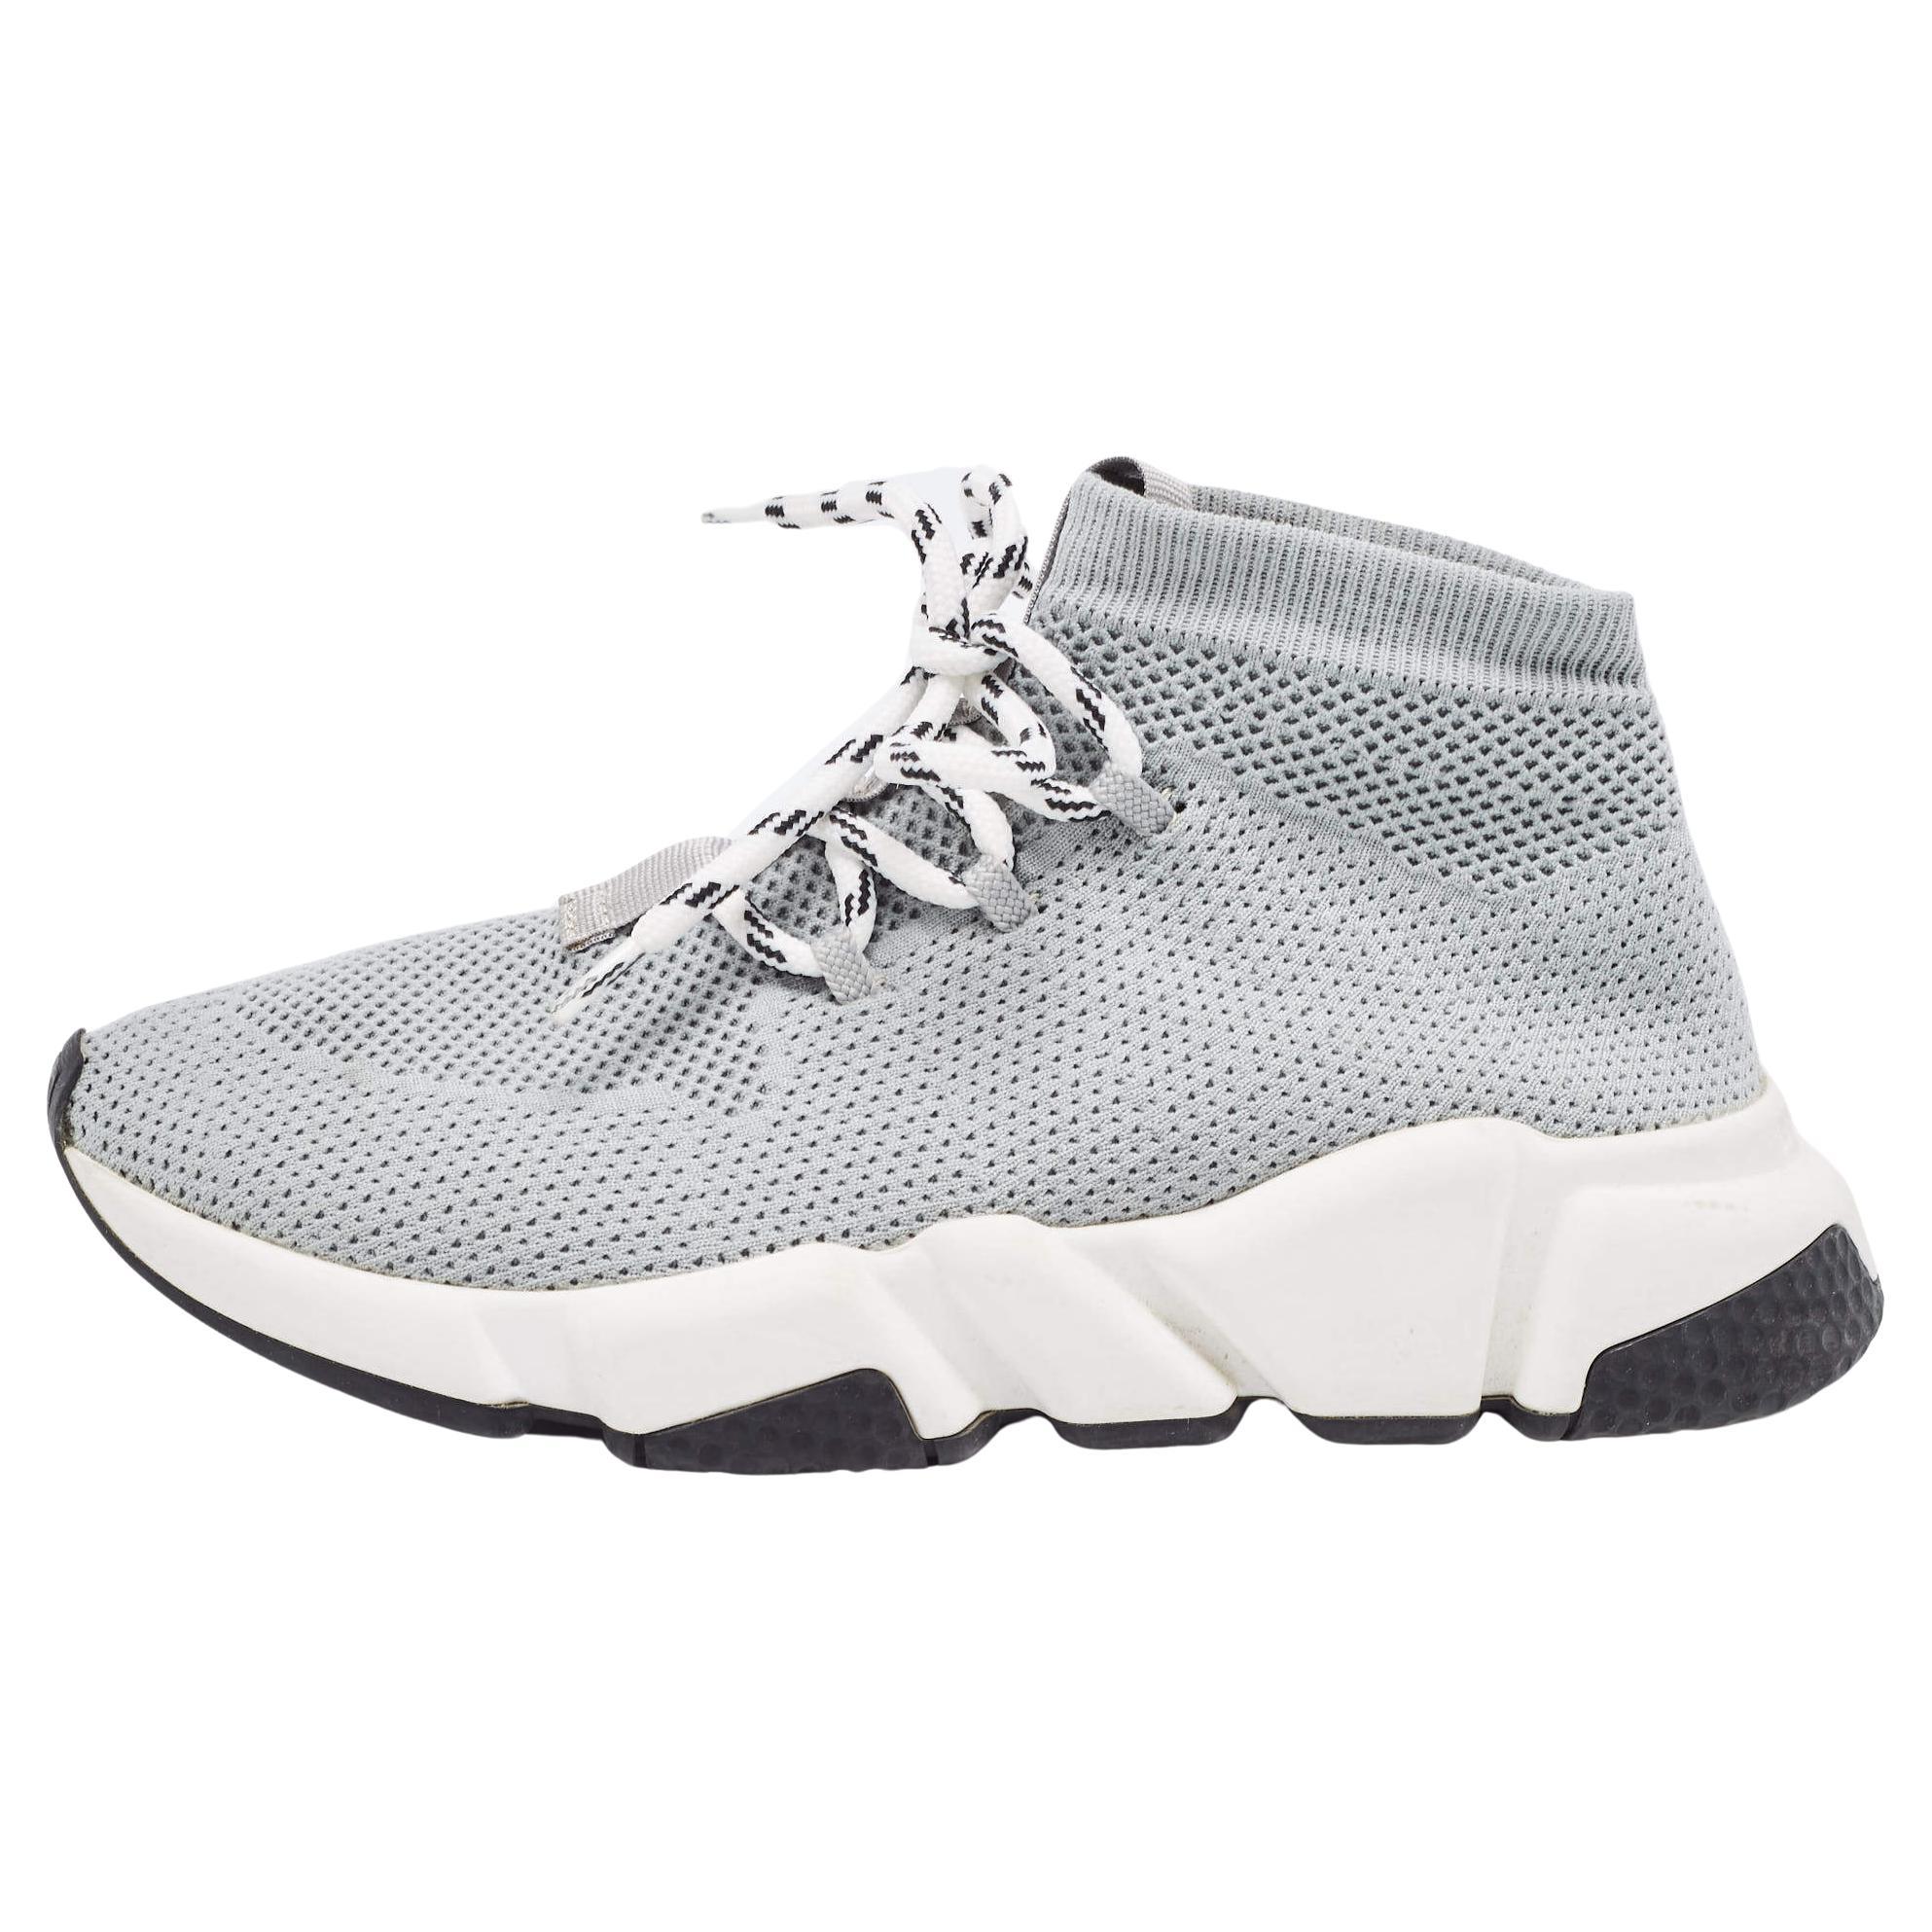 Balenciaga Grey Knit Speed Trainer High Top Sneakers Size 36 For Sale